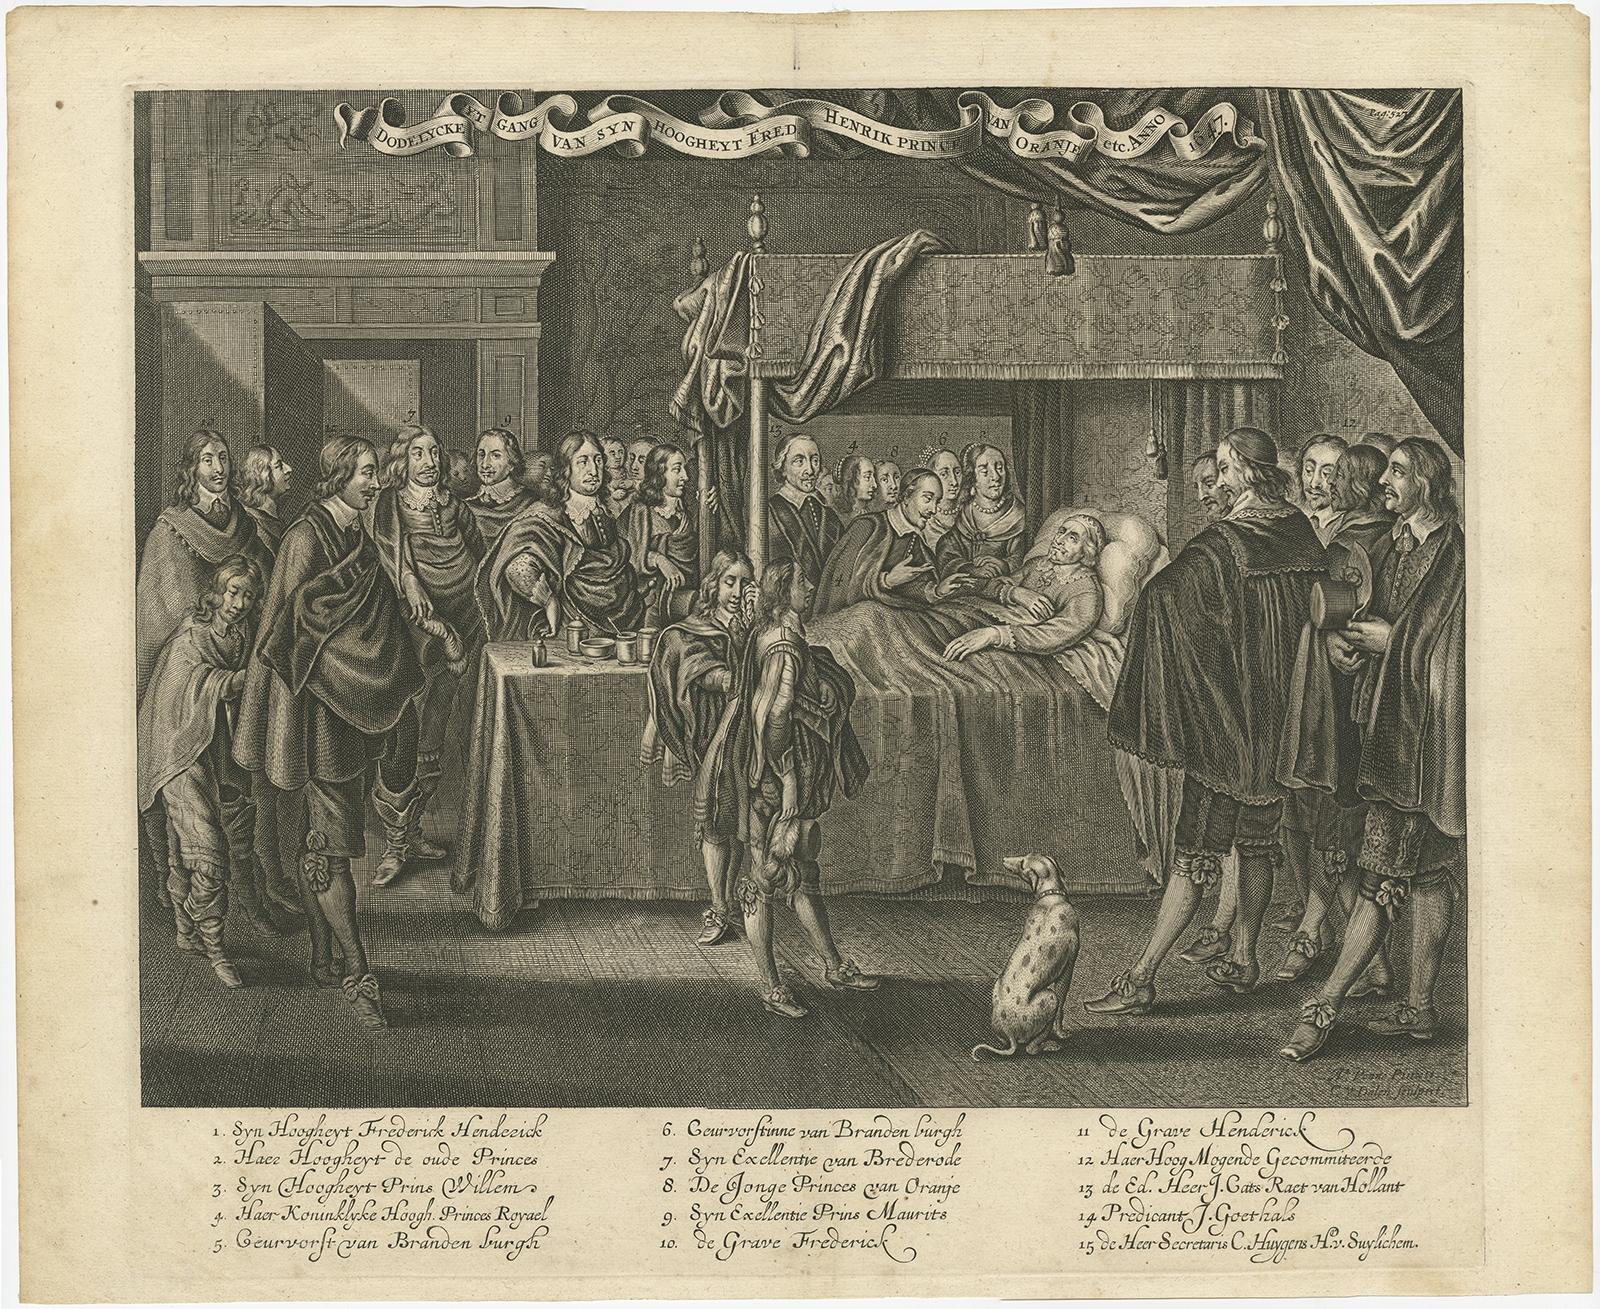 Antique print titled 'Dodelycke Uytgang van Syn Hoogheyt Fred. Hendrik Prince van Oranje etc.'. 

Old print of Frederick Henry on his death-bed, surrounded by family and officials. With legend containing the names of the family and officials.